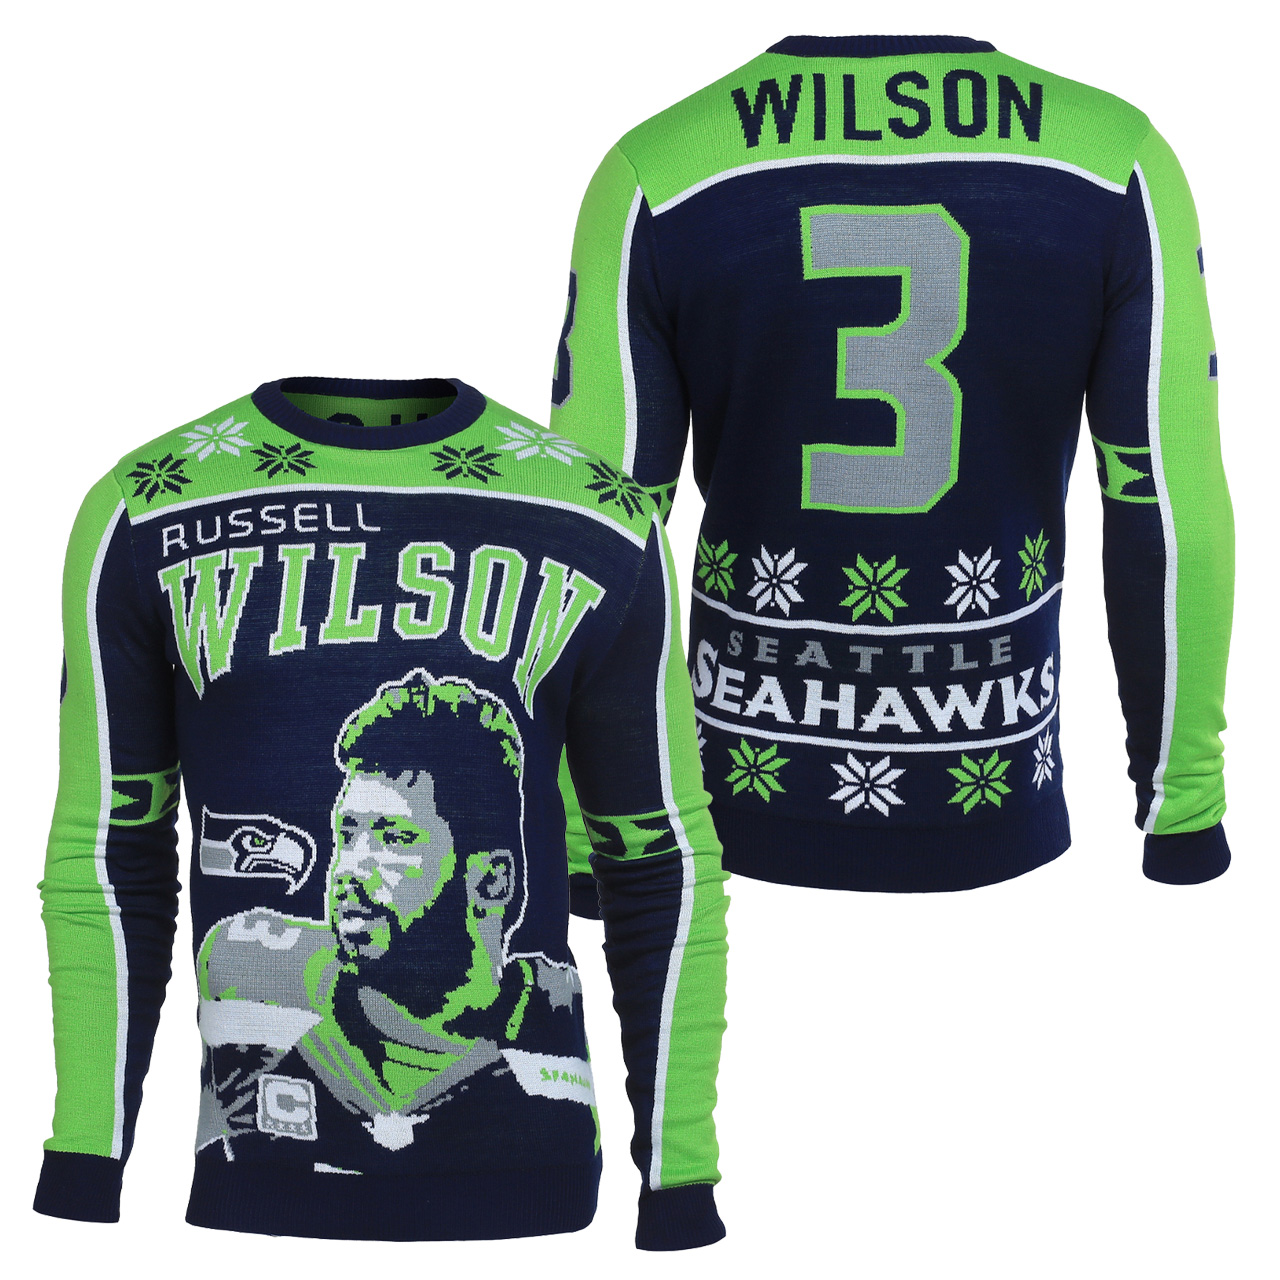 Russell Wilson #3 Seattle Seahawks NFL Player Ugly Sweater